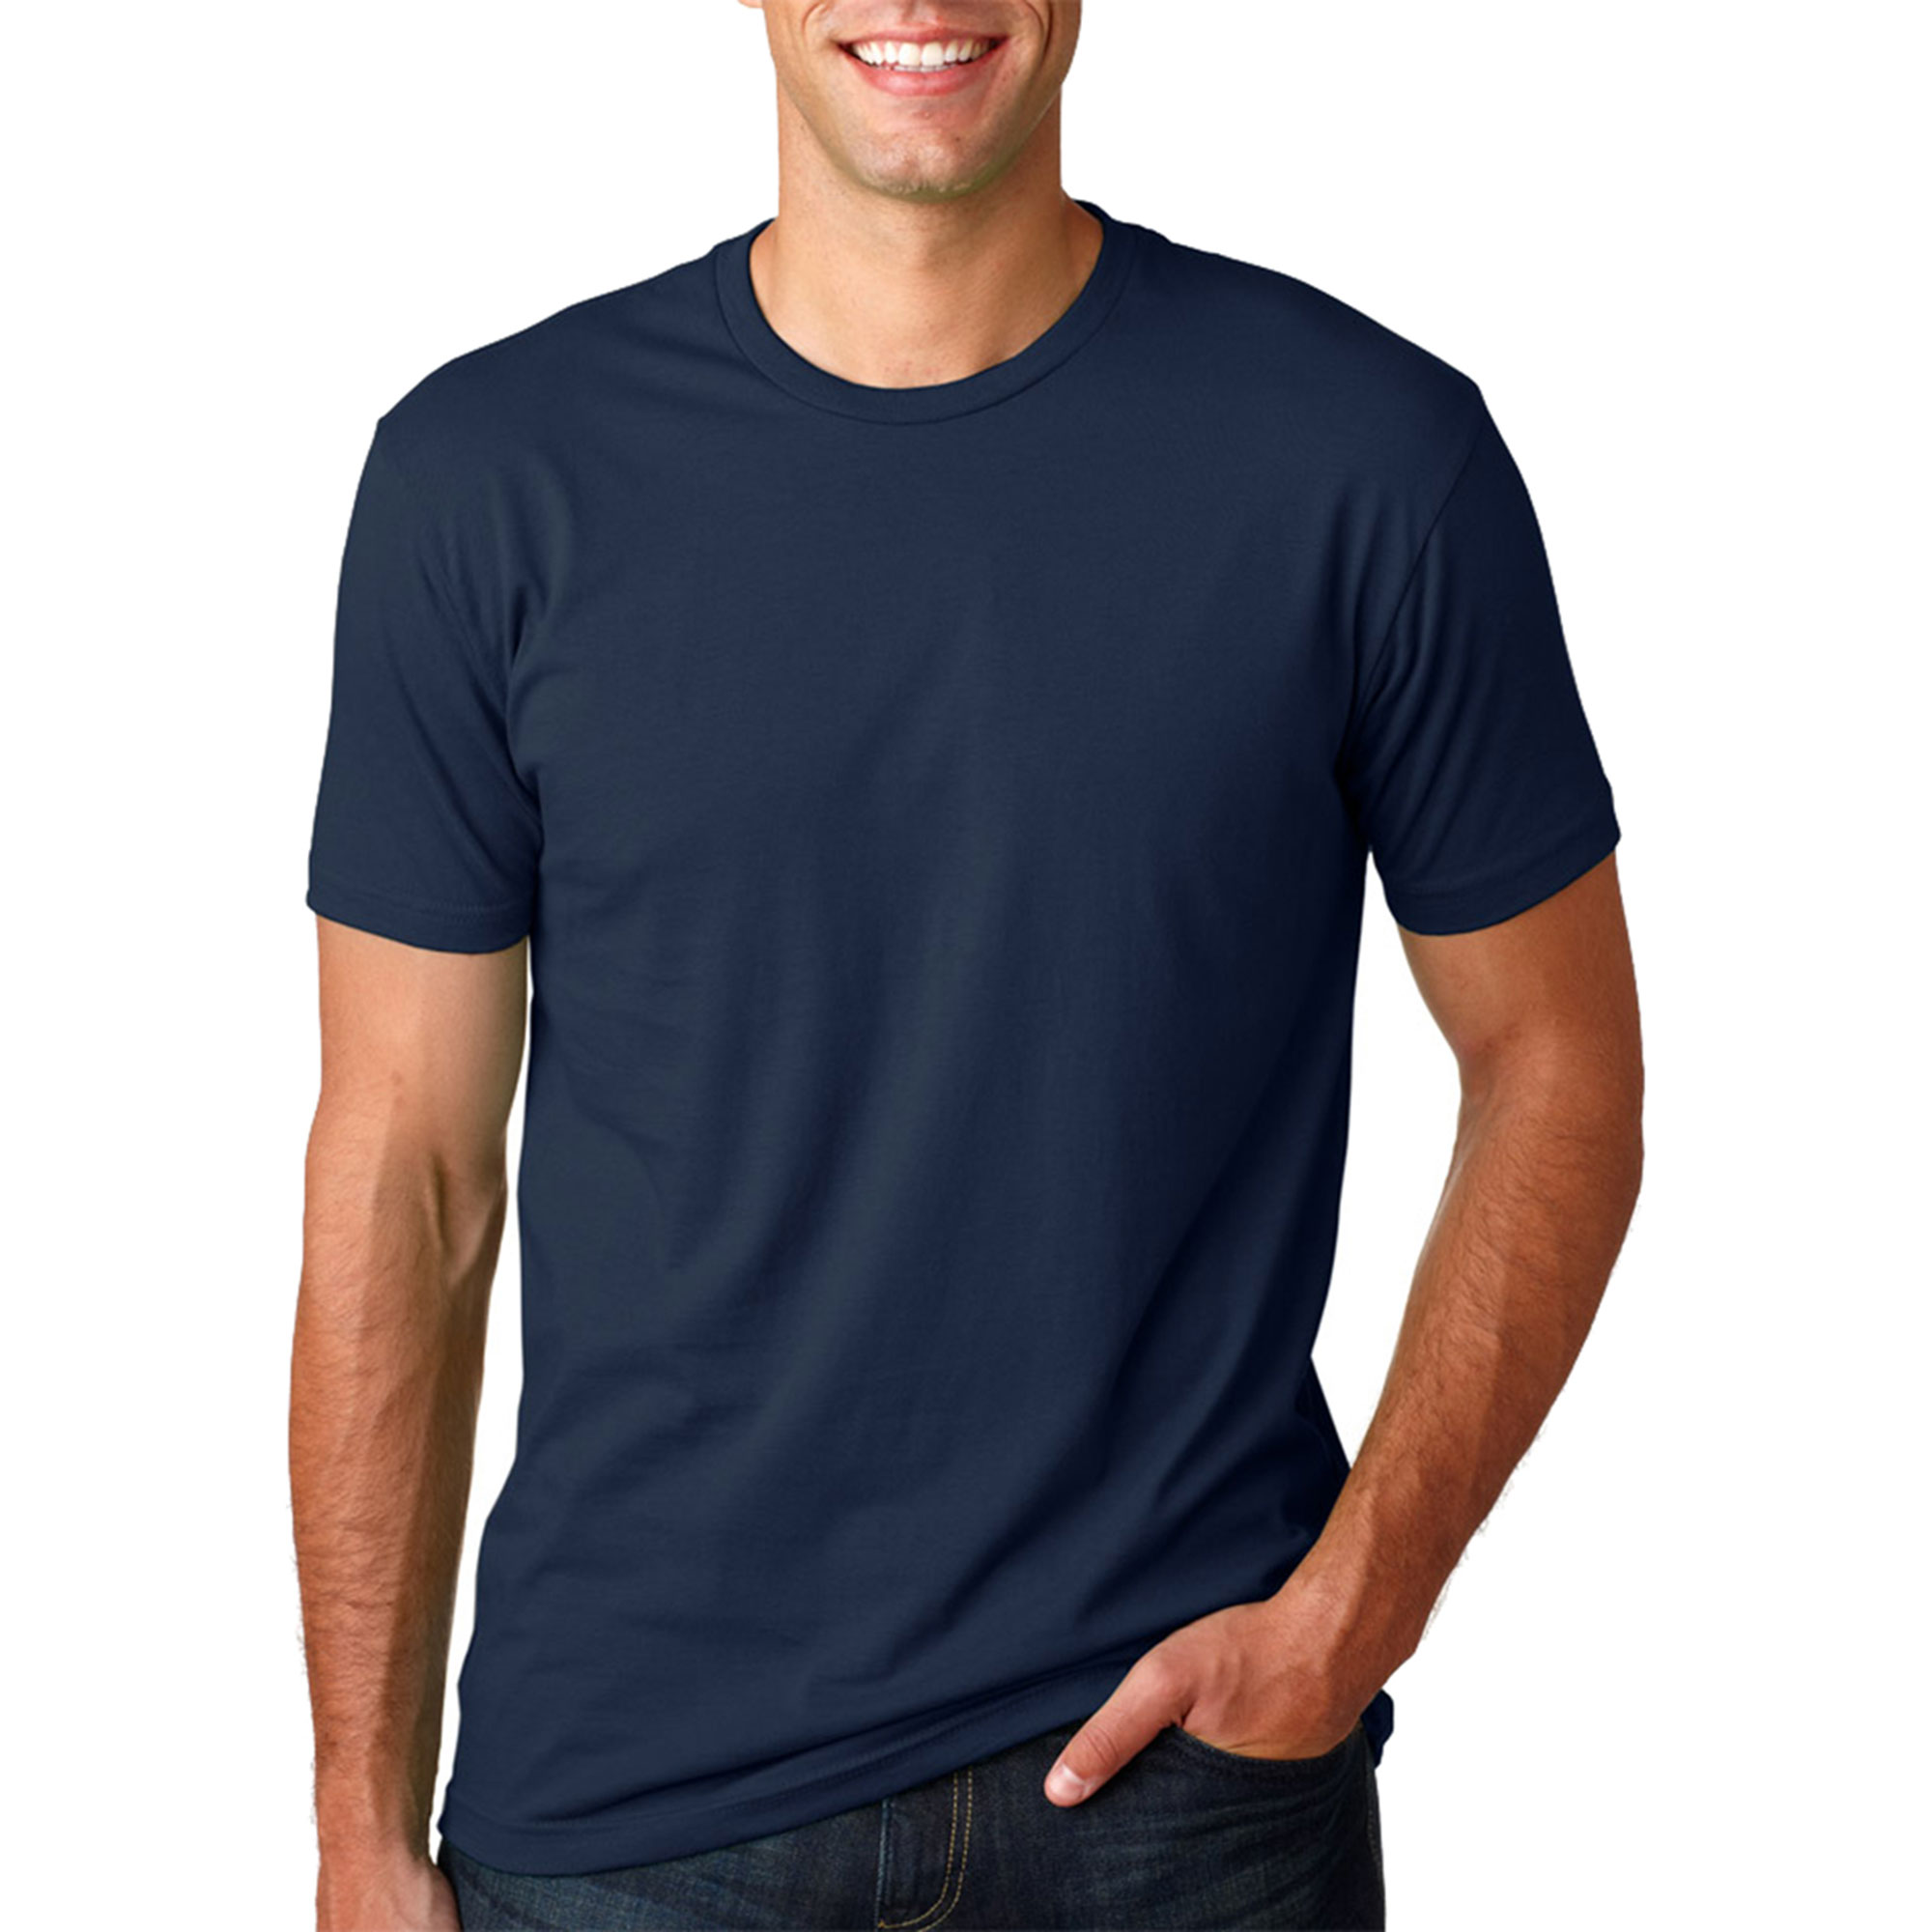 What color "t" shirt and shirt go with blue pants?